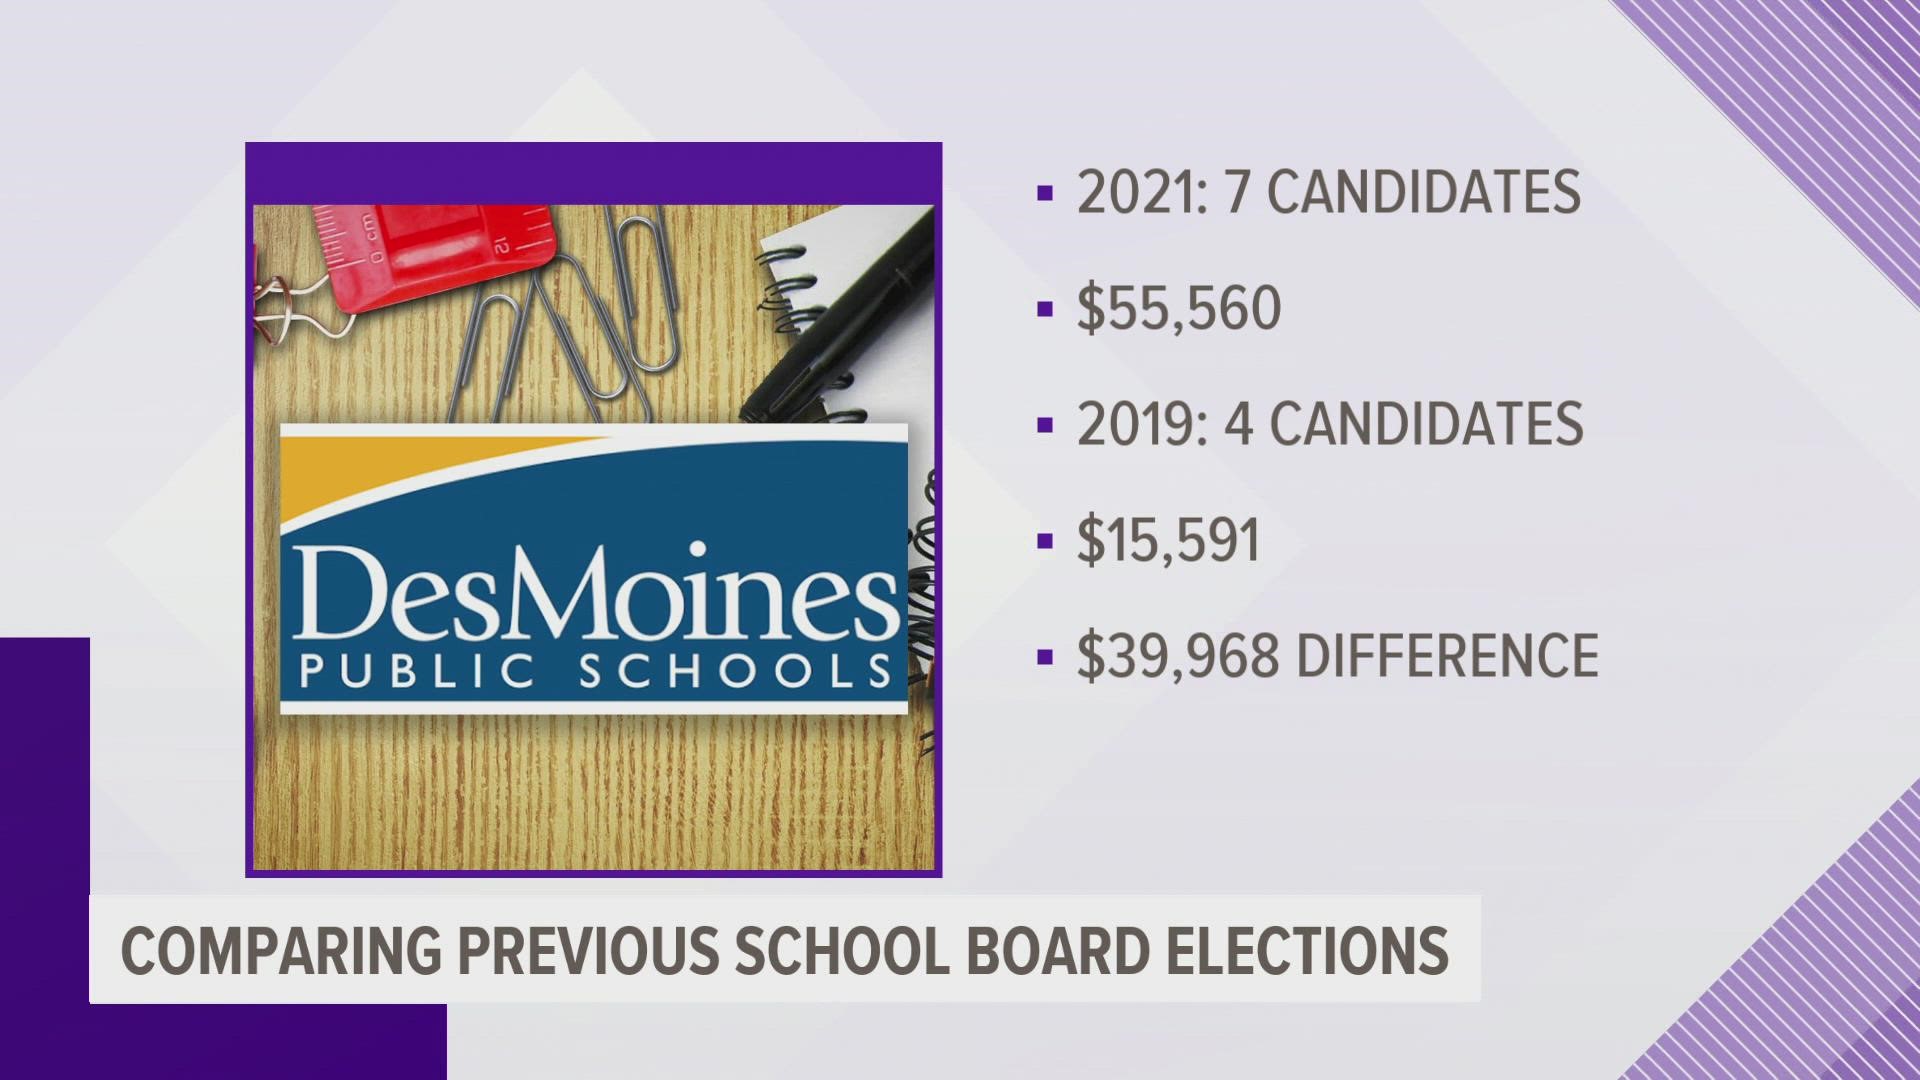 In a Des Moines Public Schools race, more than $38,000 was raised by three candidates, with one candidate raising more than $28,000.